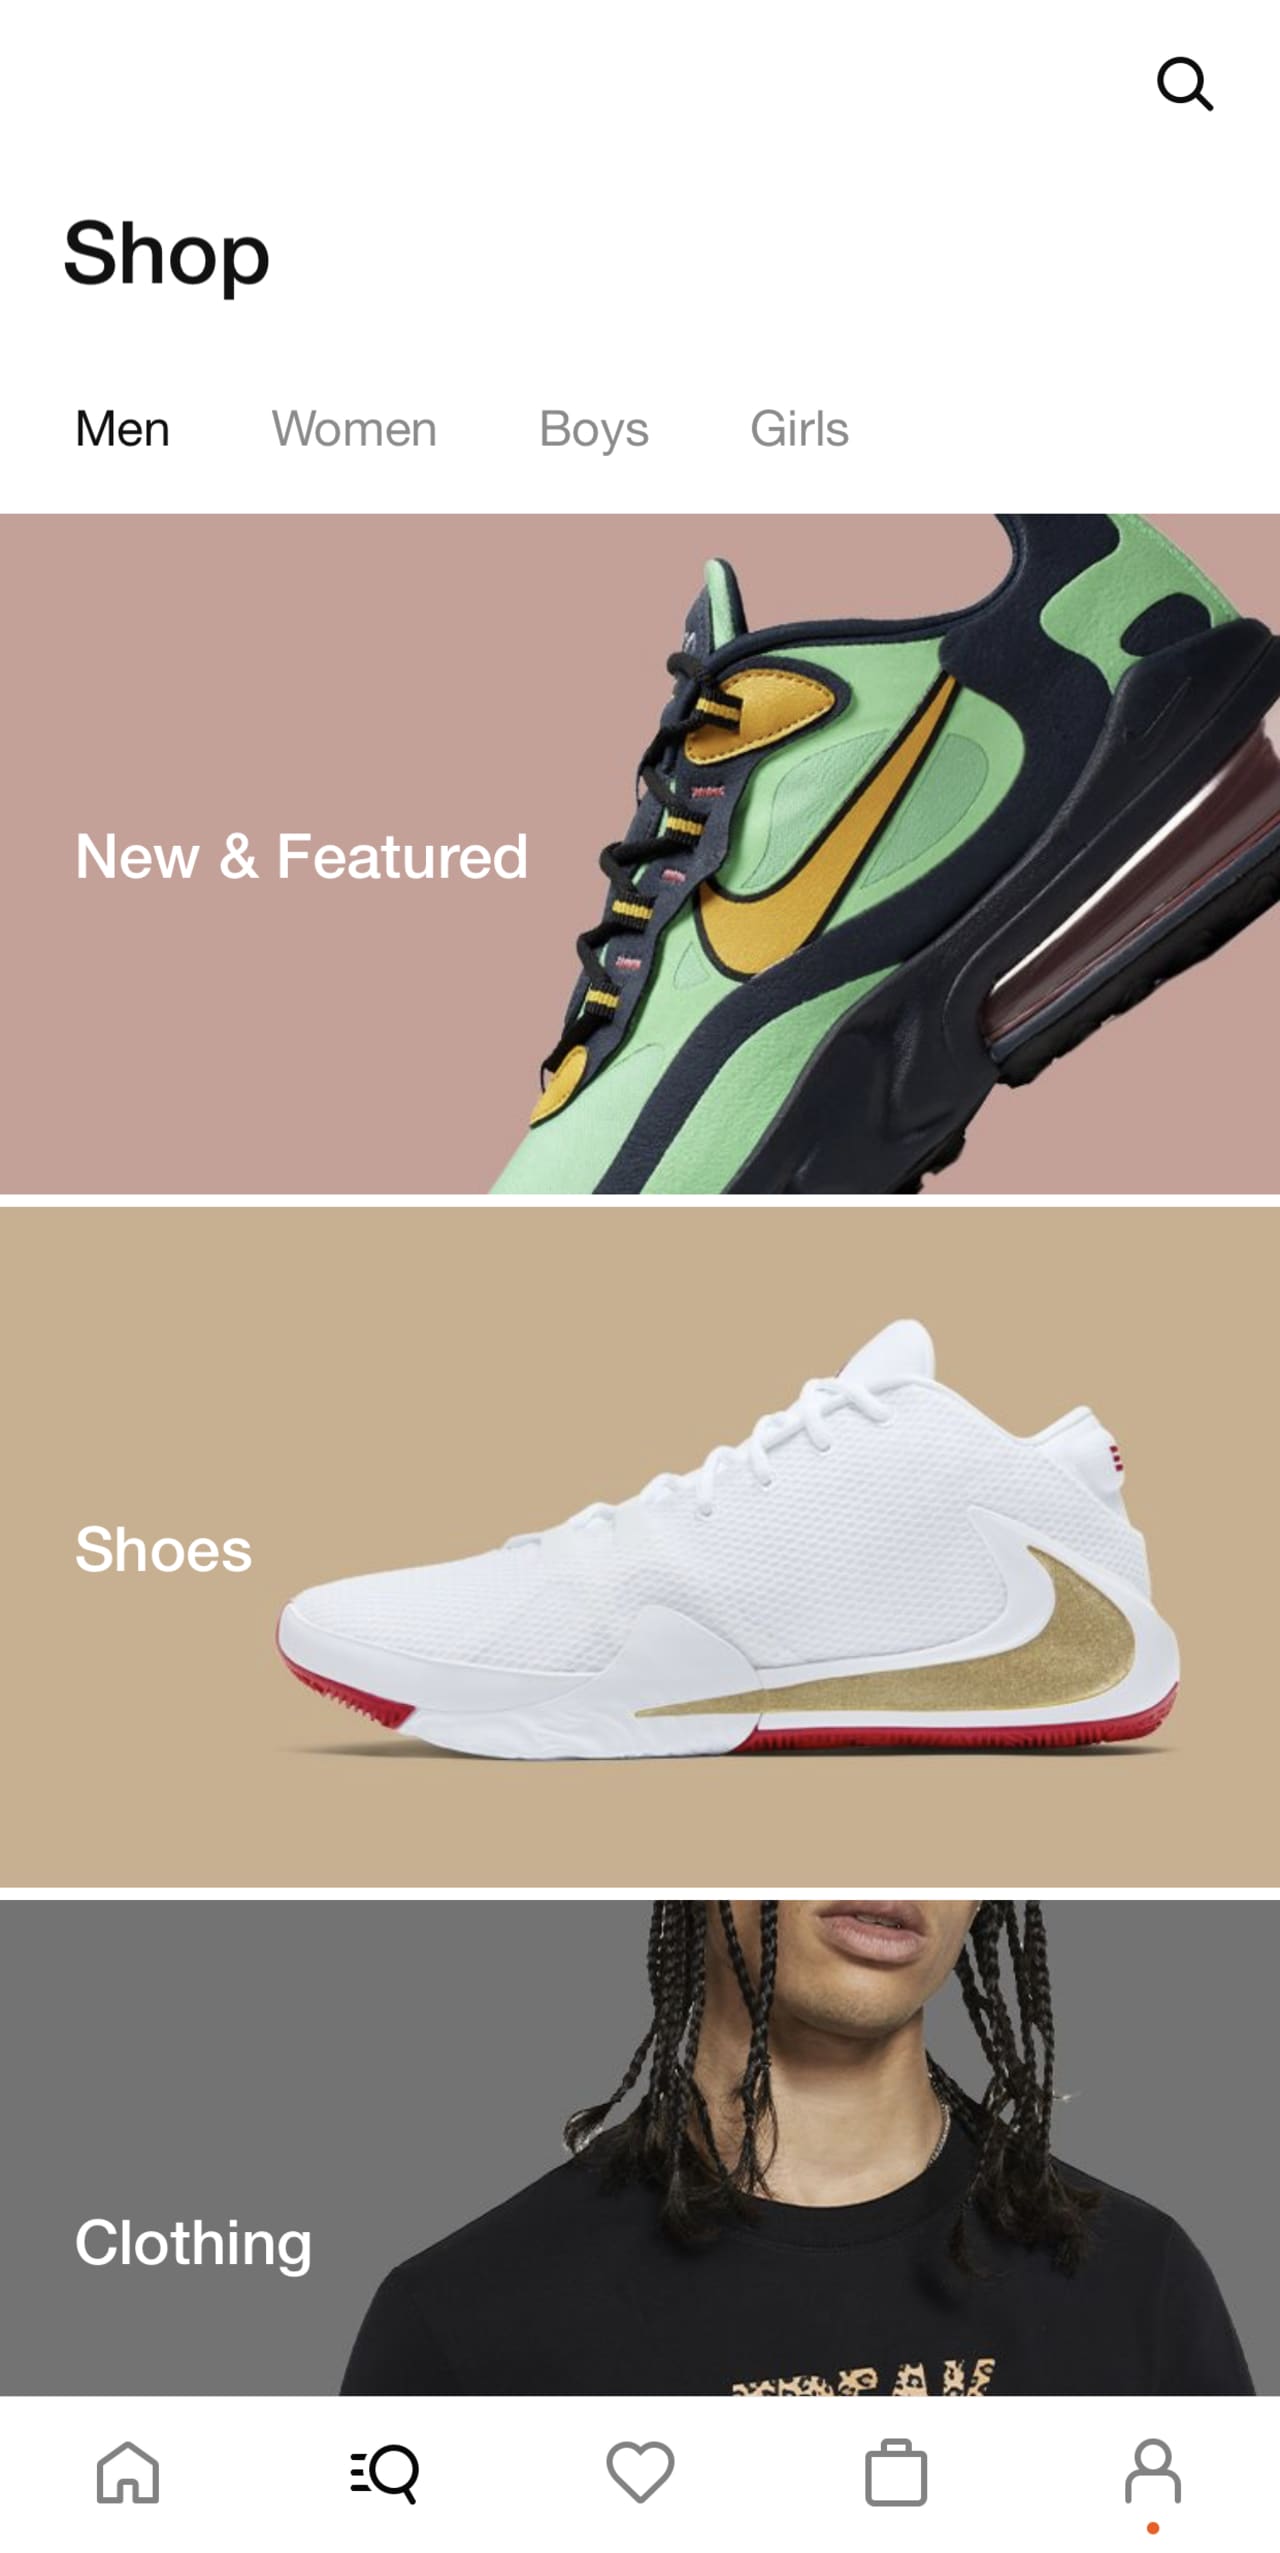 15 Best Sneaker Apps For Buying Shoes 